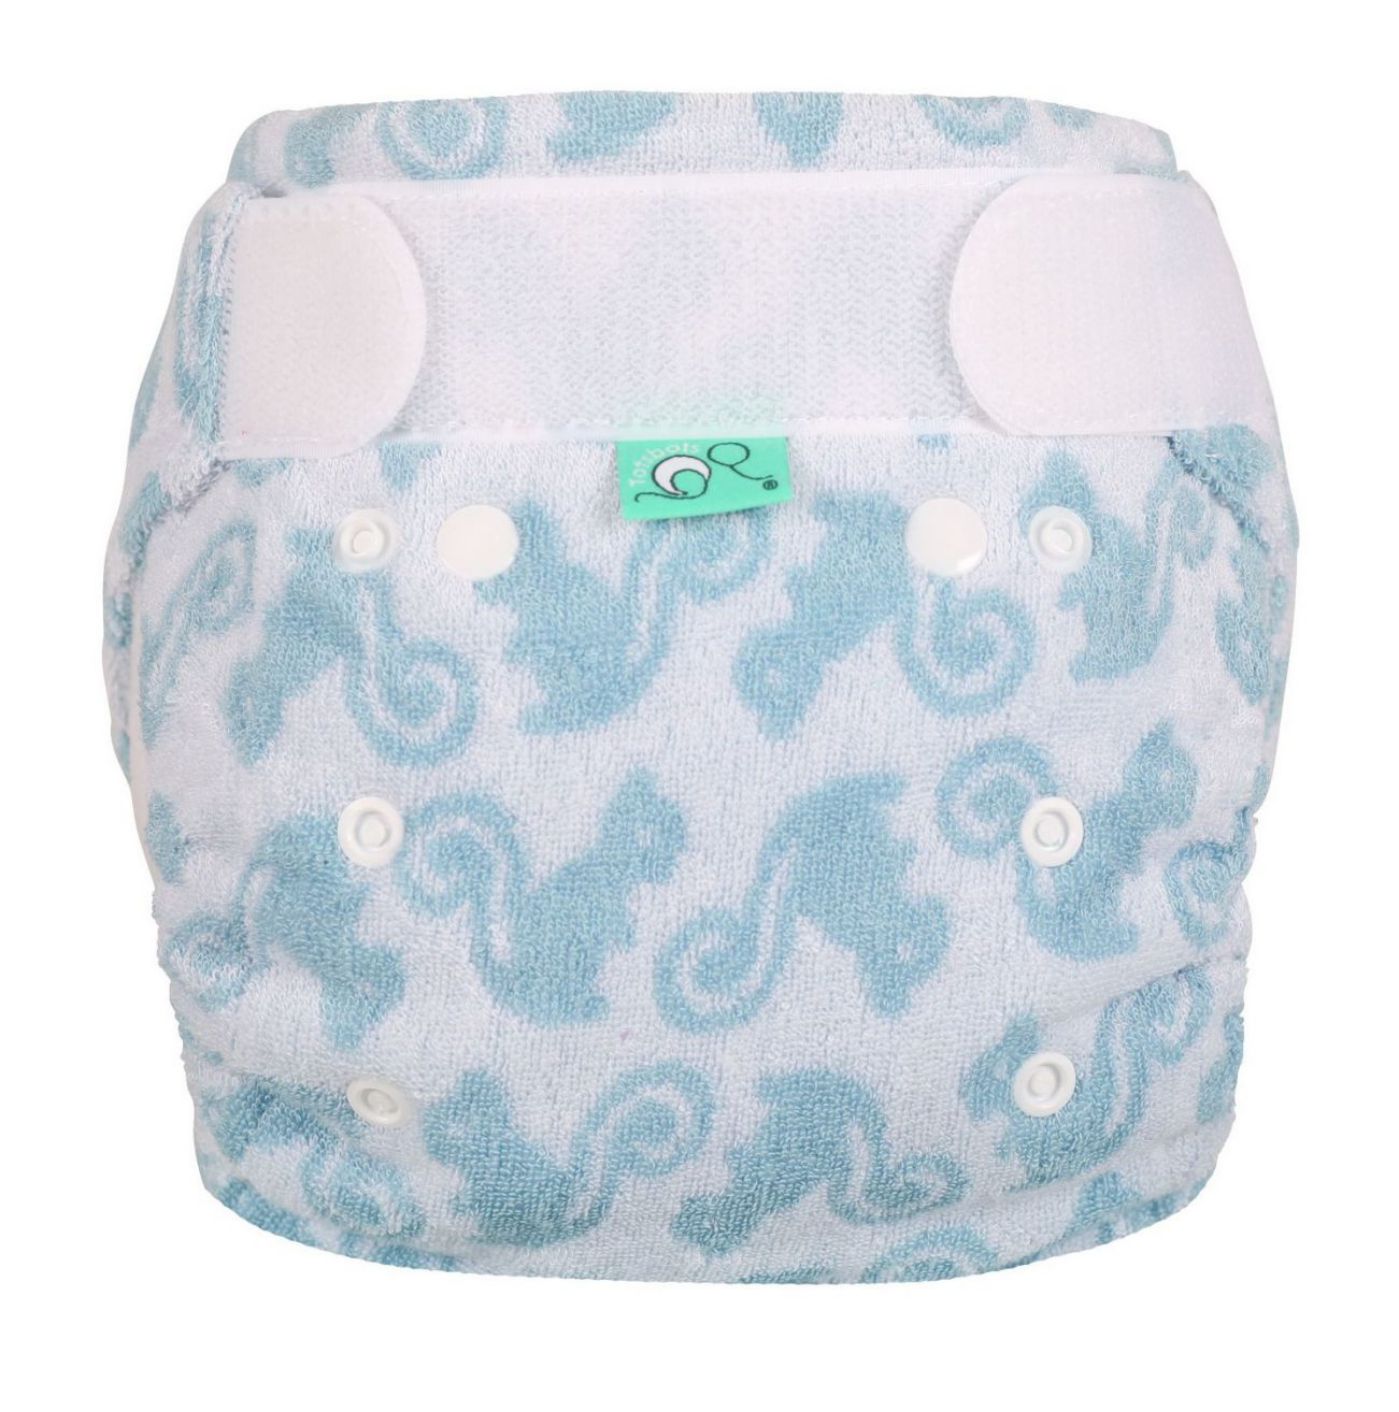 TotsBots Bamboozle Fitted Nappy Size: Newborn (2,5 - 8 kg) / TotsBots pattern: Squiddles